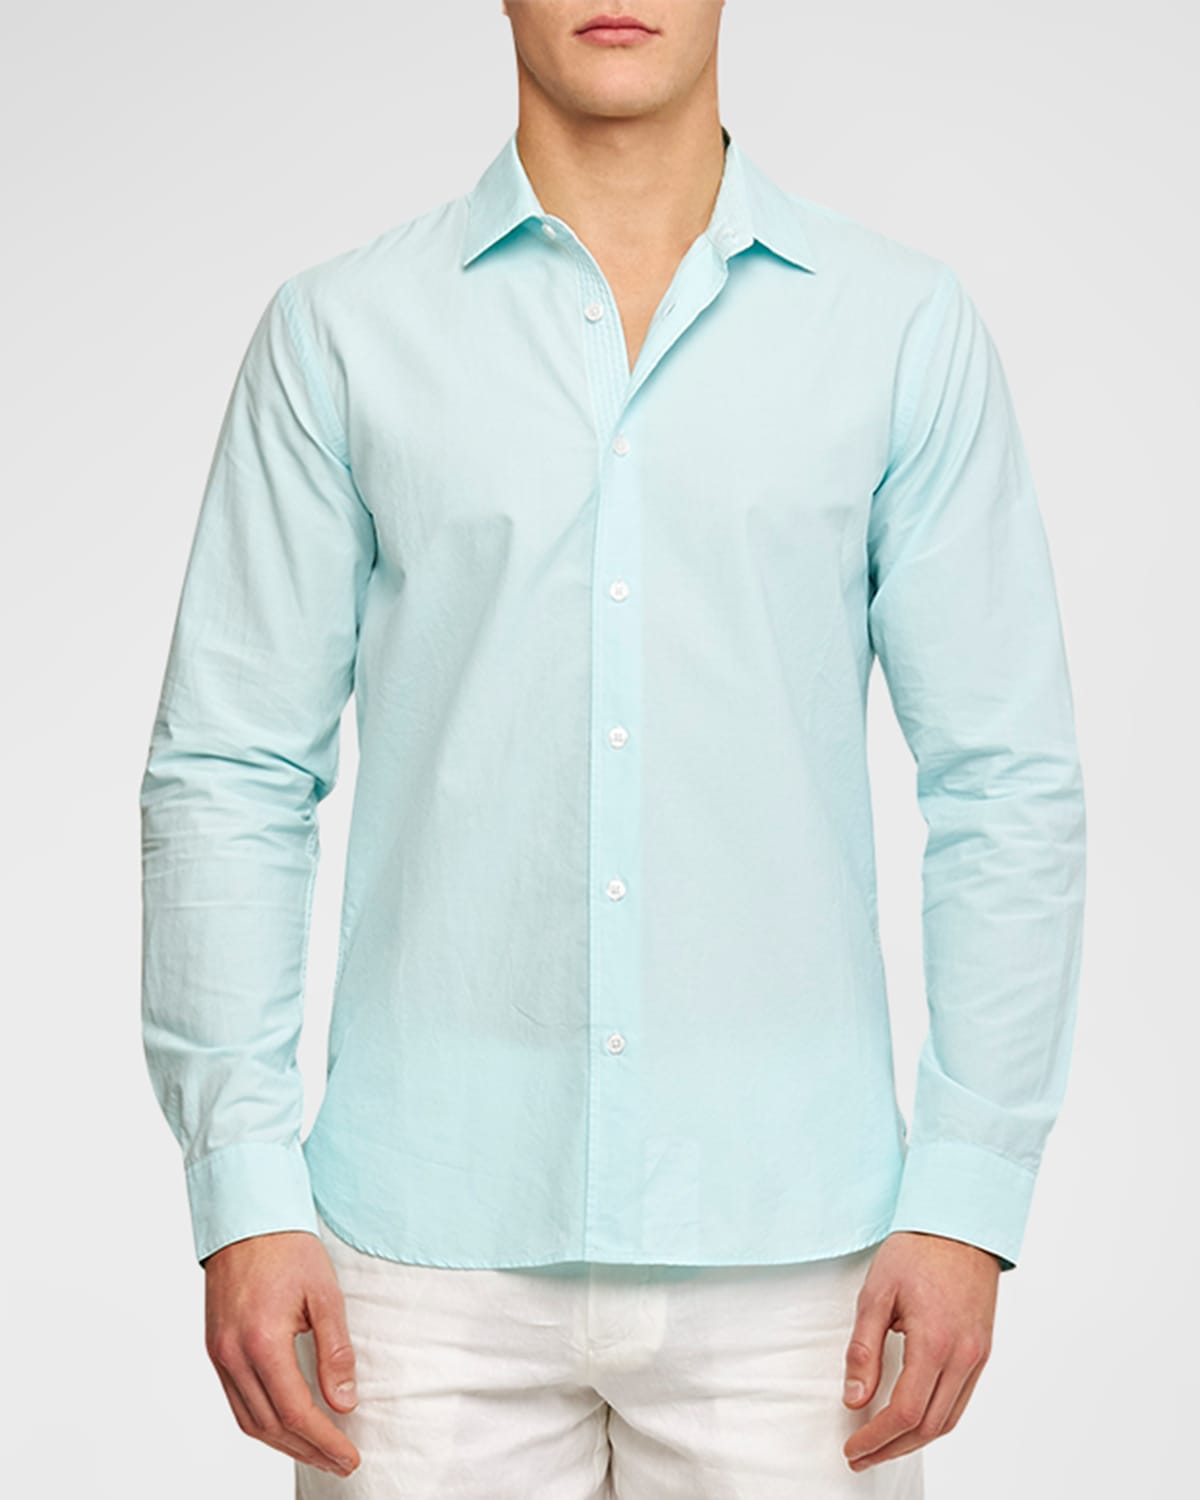 Orlebar Brown Men's Giles Solid Chainstitch Sport Shirt In Clear Sky White